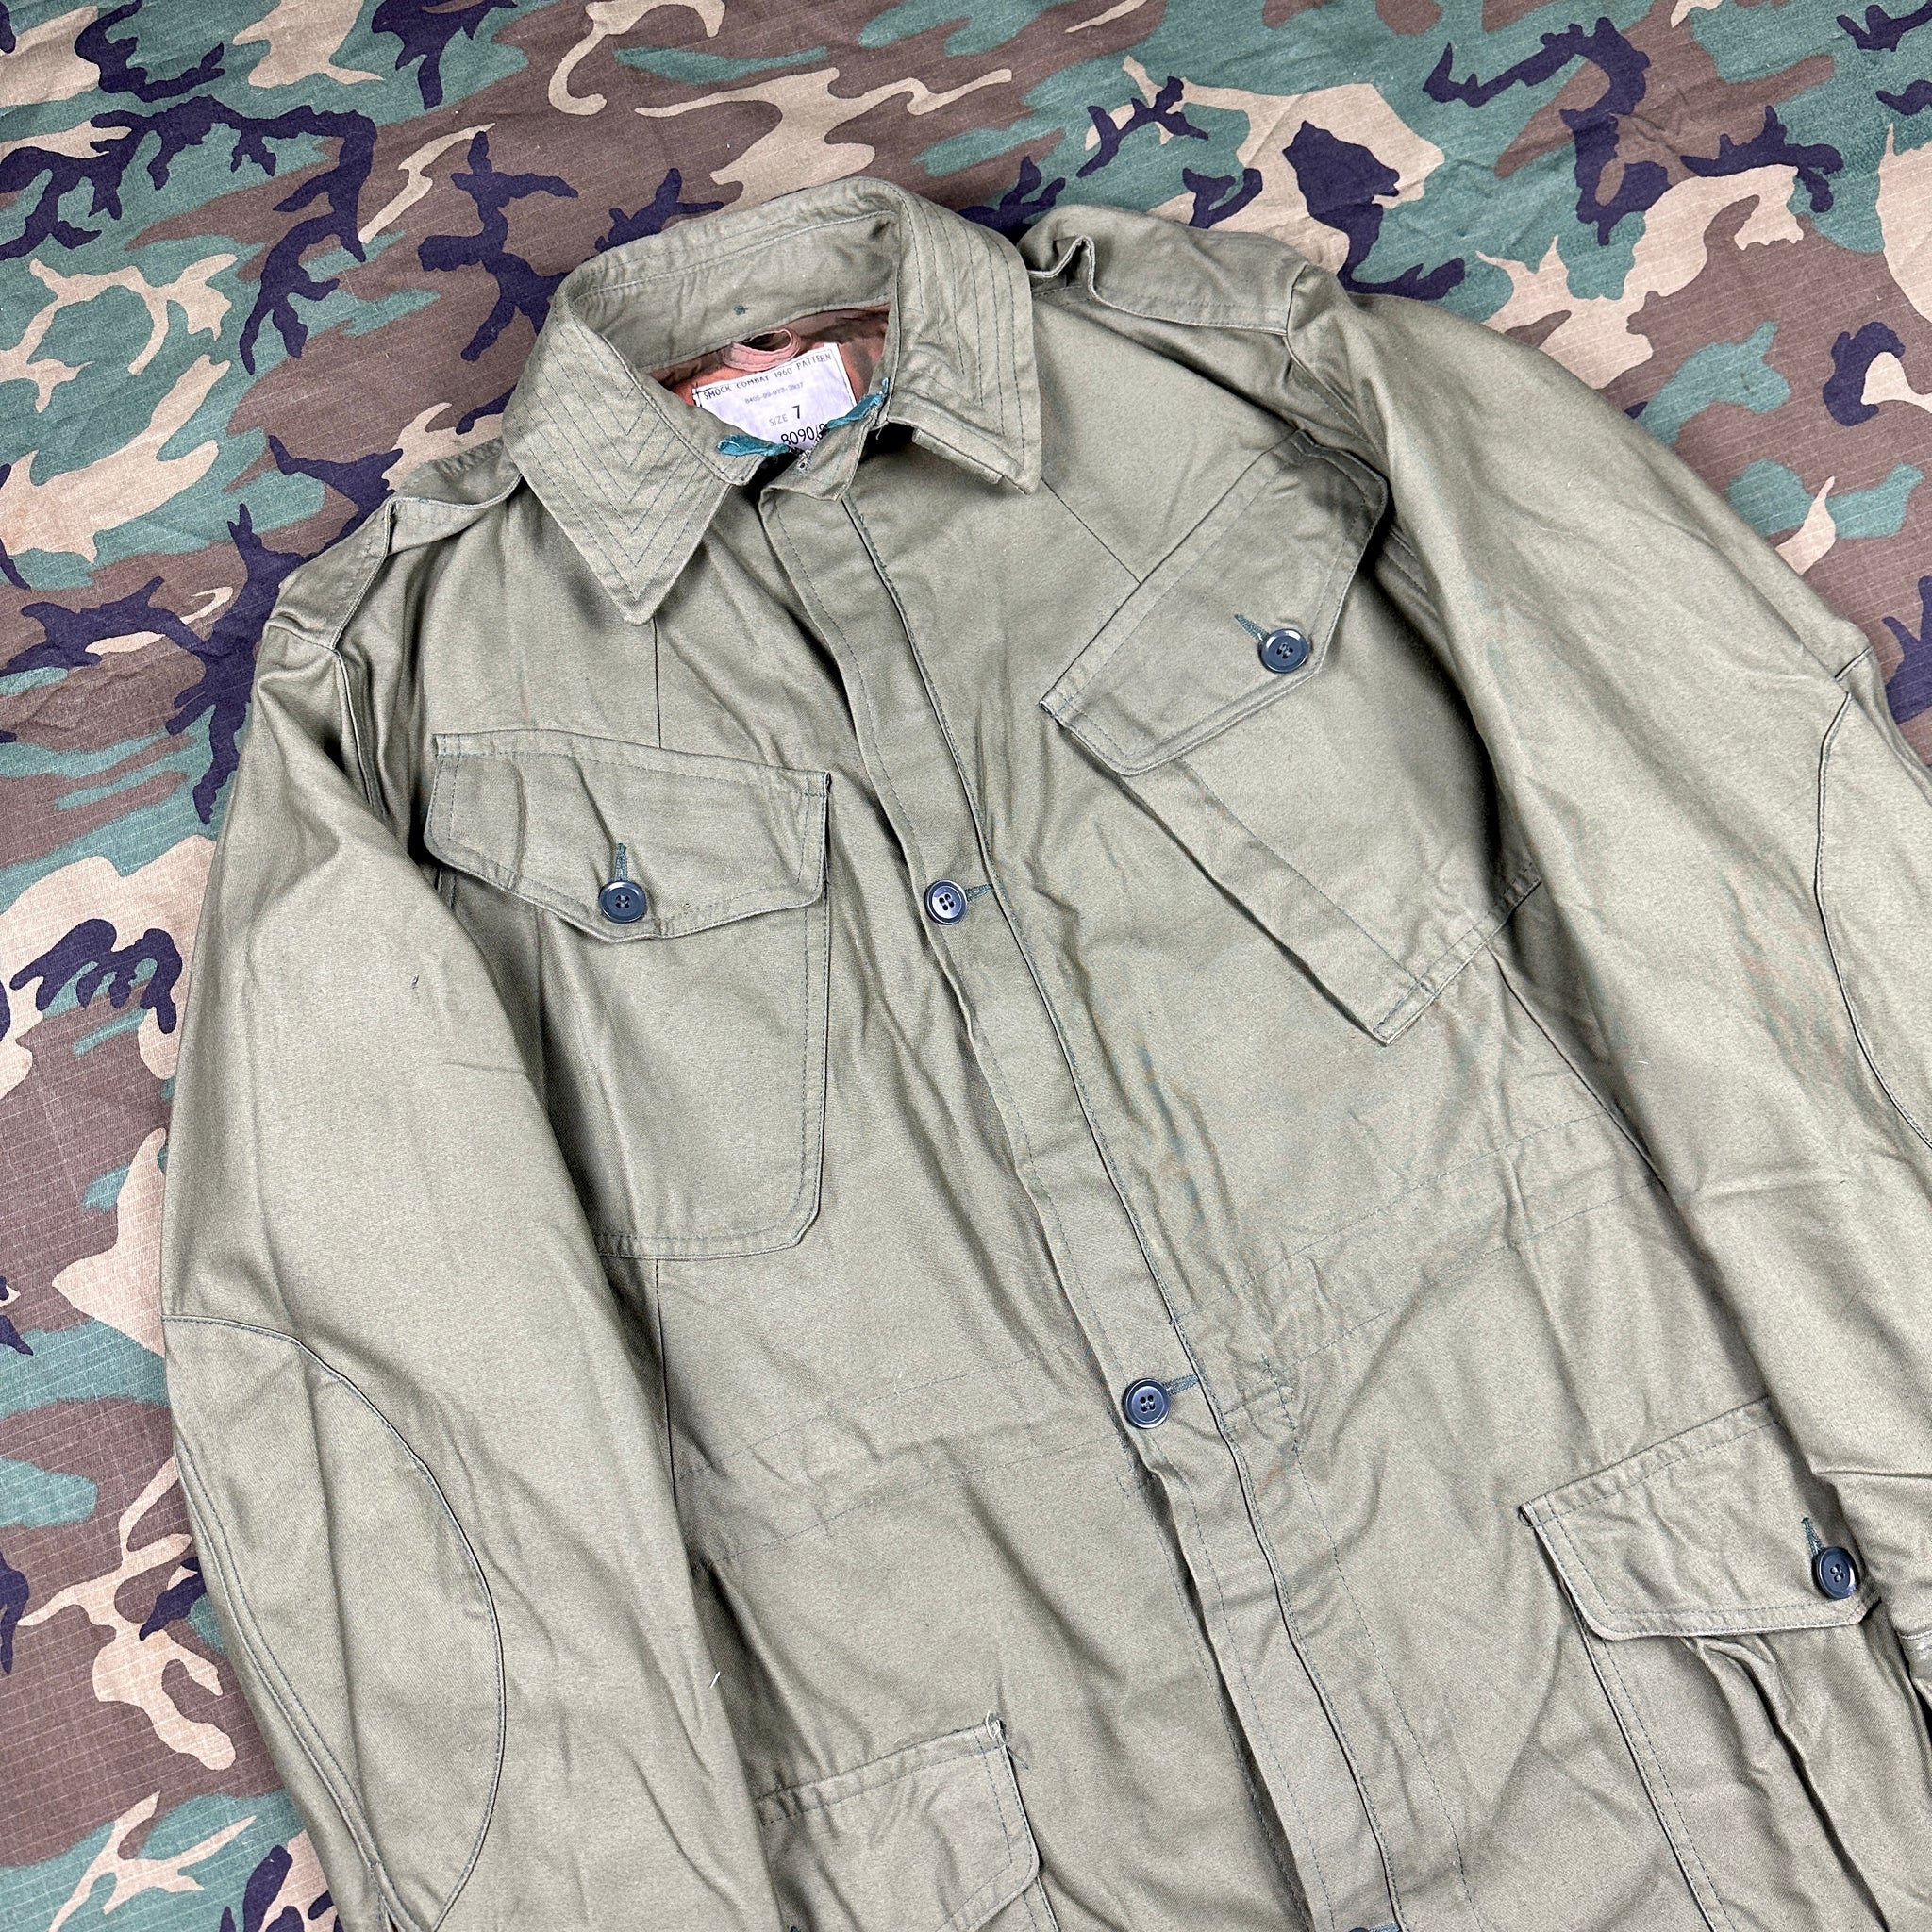 Deadstock British Army 1960 Combat Smock (rare large size) – The